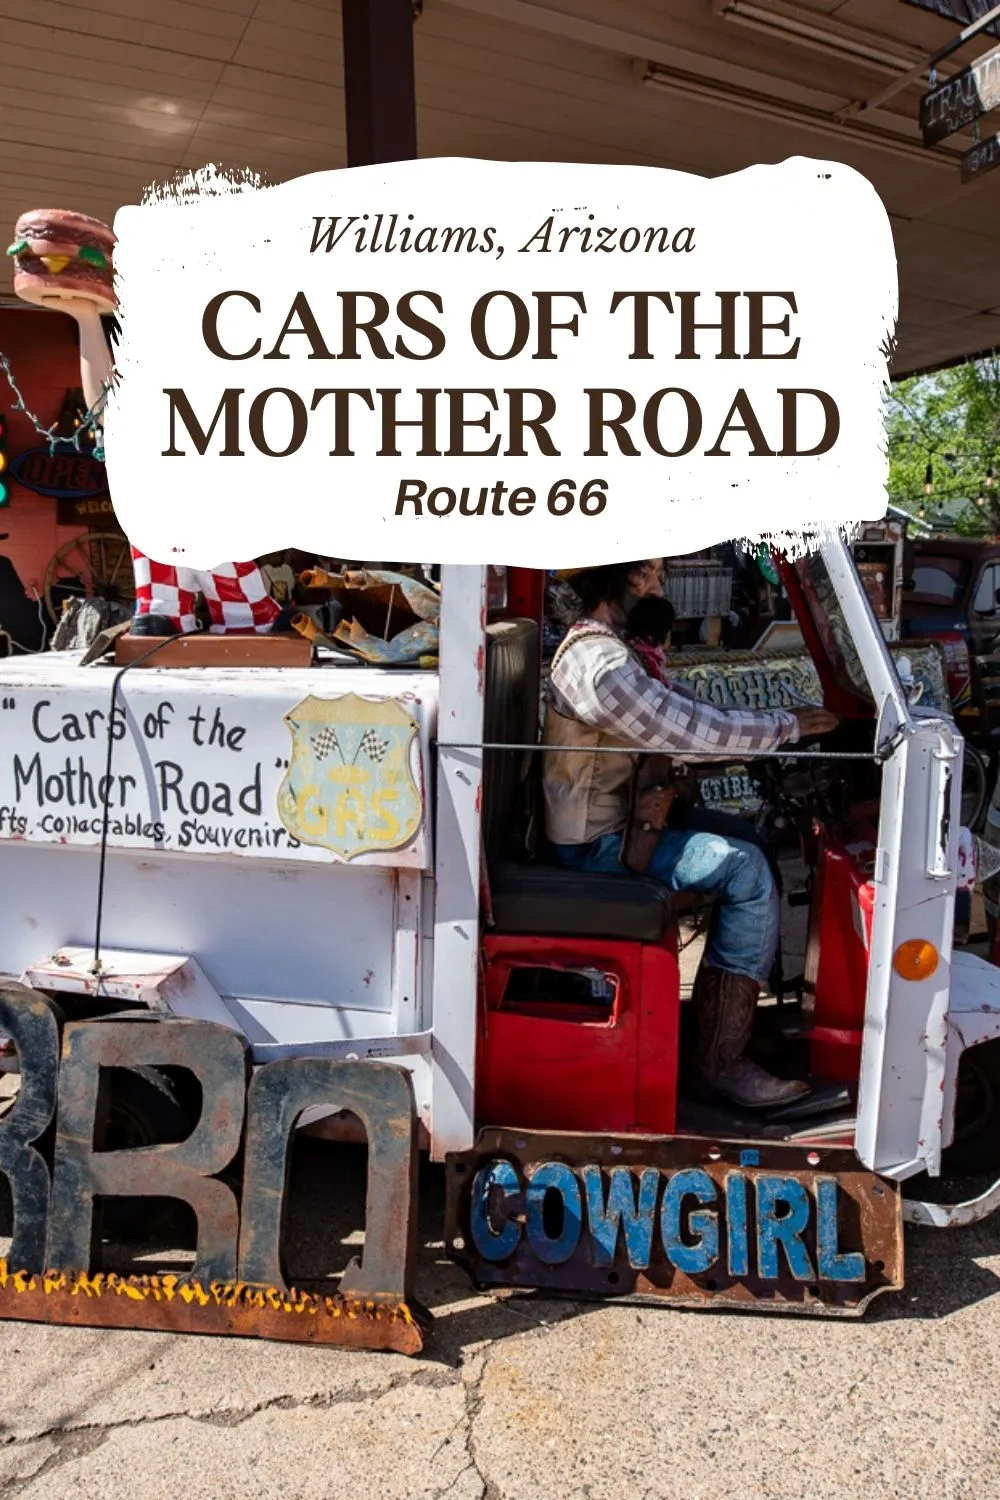 Cars of the Mother Road in Williams, Arizona is a fun stop for souvenirs, tours, and more. Outside of the Route 66 gift shop is a garden full of vintage cars, antiques, and fun photos ops. Find antiques, mementos, and souvenirs or book a mini guided tour of Williams Route 66 in a vintage vehicle at this Route 66 roadside attraction. Add it to the travel itinerary for your Route 66 road trip. #Route66 #Route66RoadTrip #RoadsideAttraction #RoadsideAttractions #Arizona #ArizonaRoadTrip